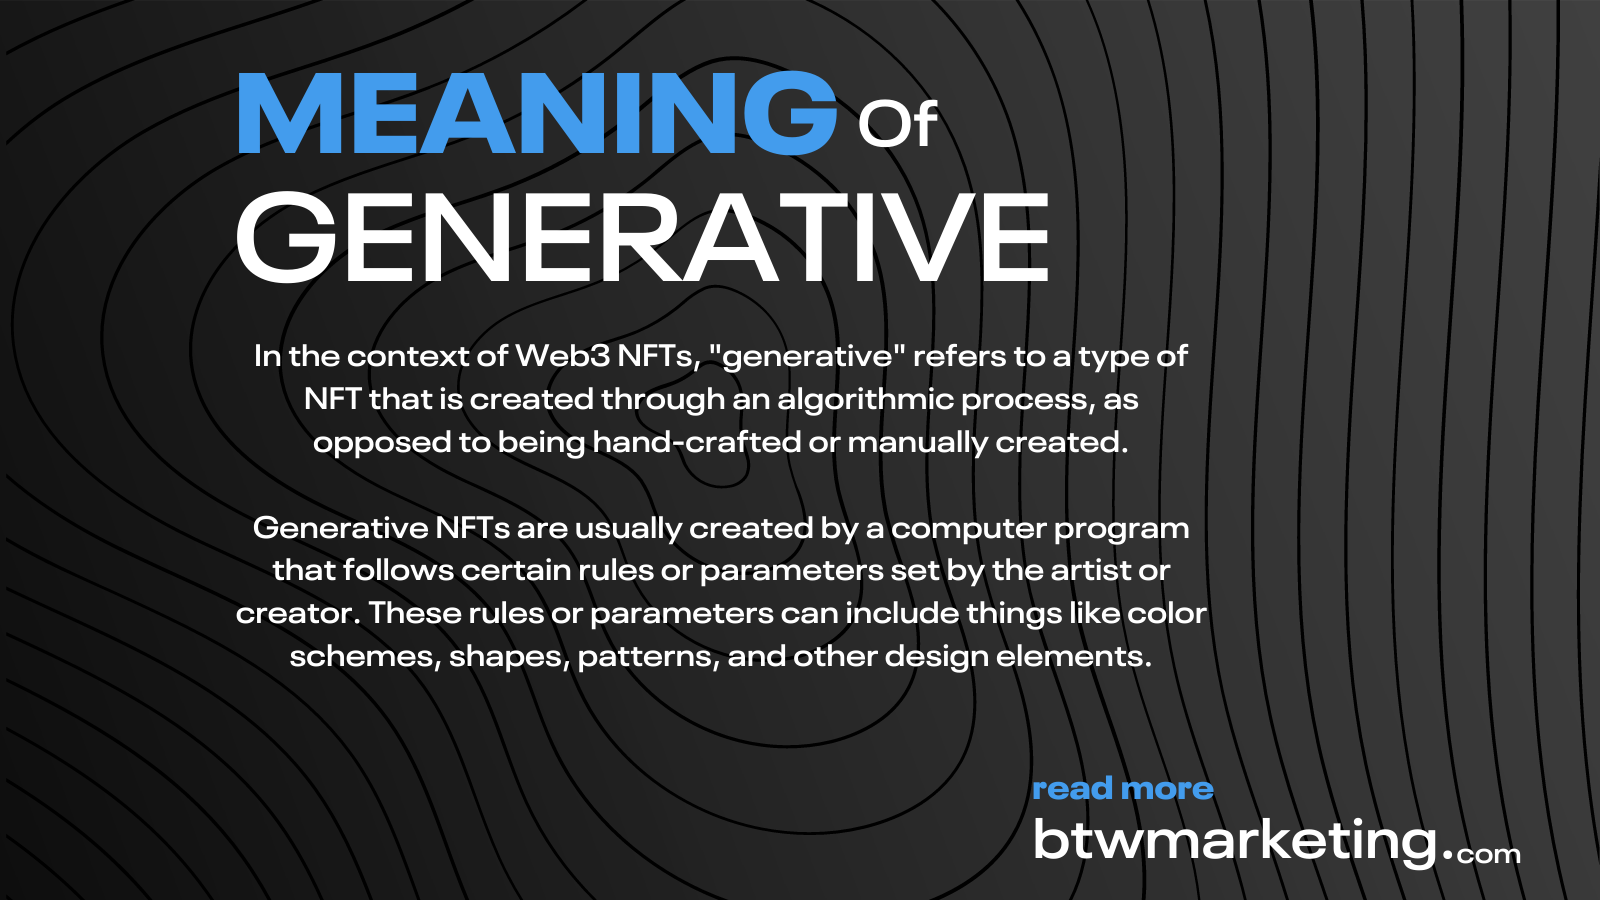 Generative  In the context of Web3 NFTs, "generative" refers to a type of NFT that is created through an algorithmic process, as opposed to being hand-crafted or manually created.